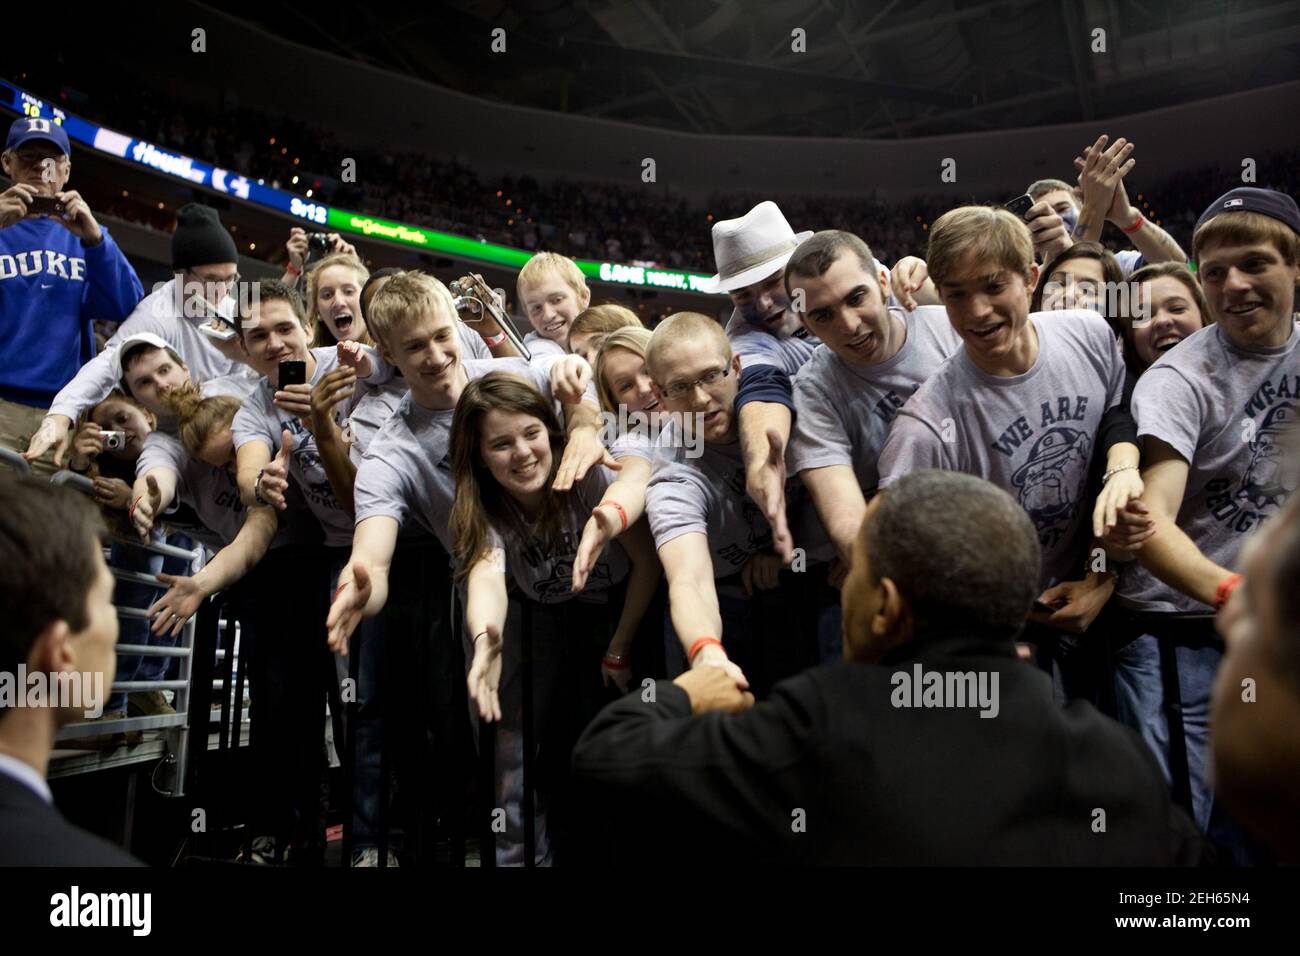 President Barack Obama shakes hands with fans at the Georgetown-Duke college basketball game at the Verizon Center in Washington, D.C., Jan. 30, 2010. Stock Photo